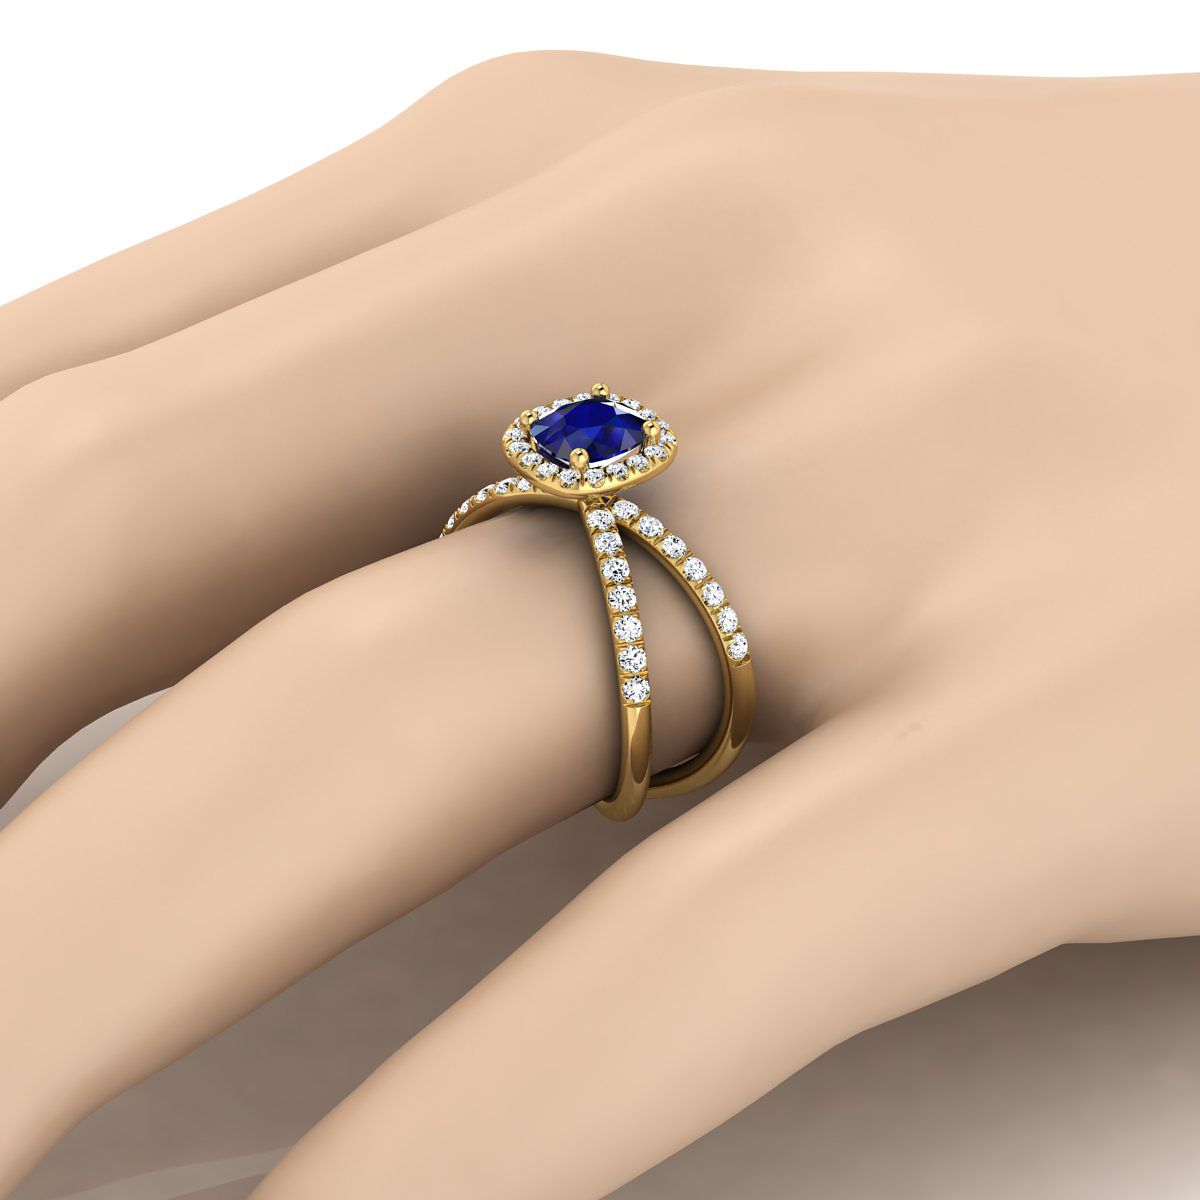 18K Yellow Gold Cushion Sapphire Open Criss Cross French Pave Diamond Engagement Ring -1/2ctw